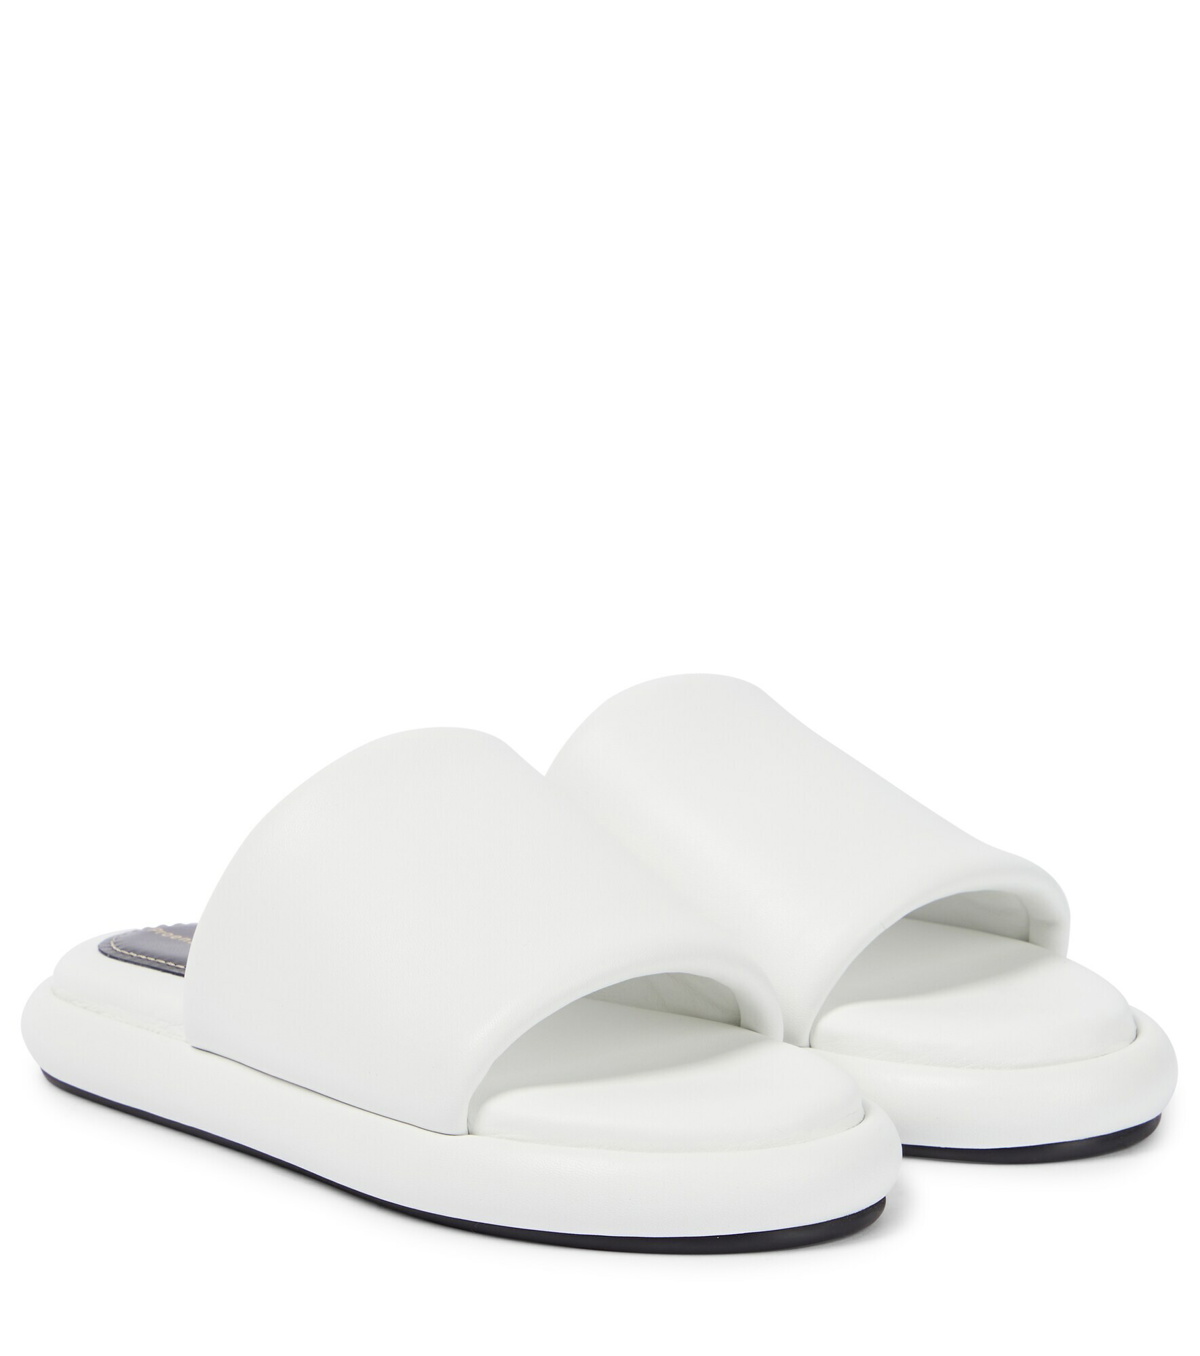 Proenza Schouler - Pipe padded leather slides Proenza Schouler